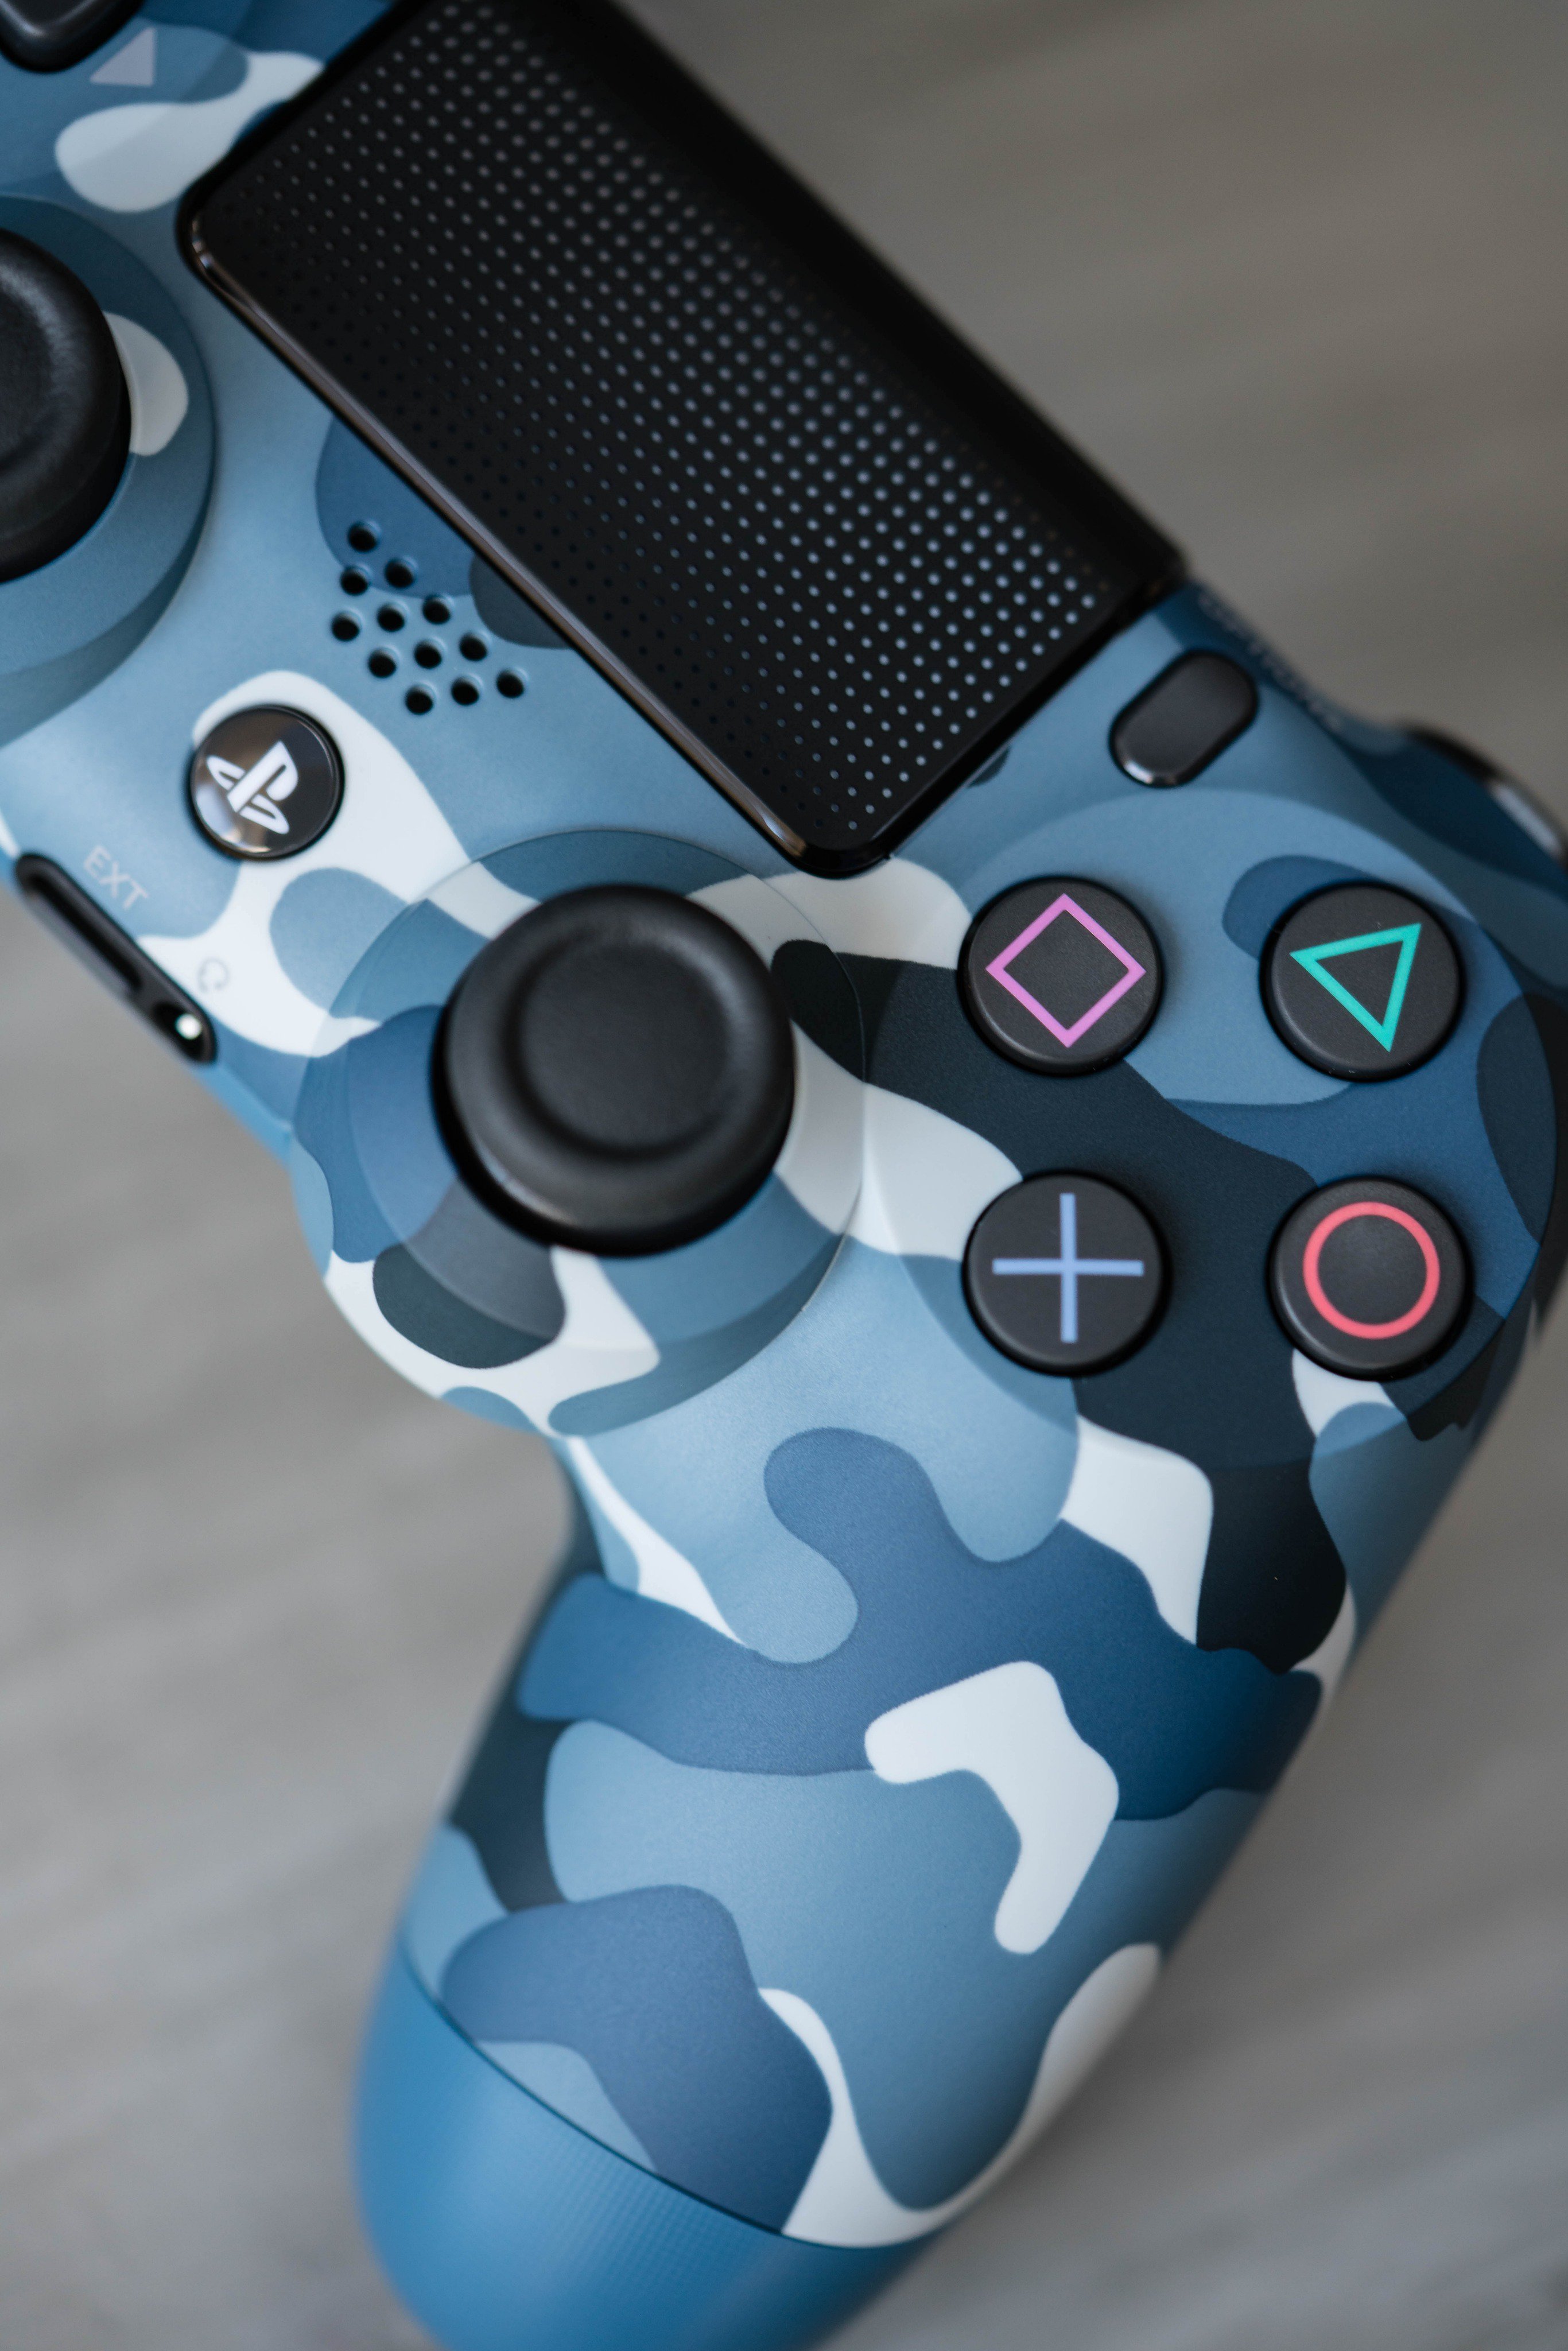 PlayStation on Twitter: "The new Blue Camo DualShock 4 controller is ready to jump into https://t.co/FfjecGaLeD https://t.co/GjNYGx8JbR" / Twitter